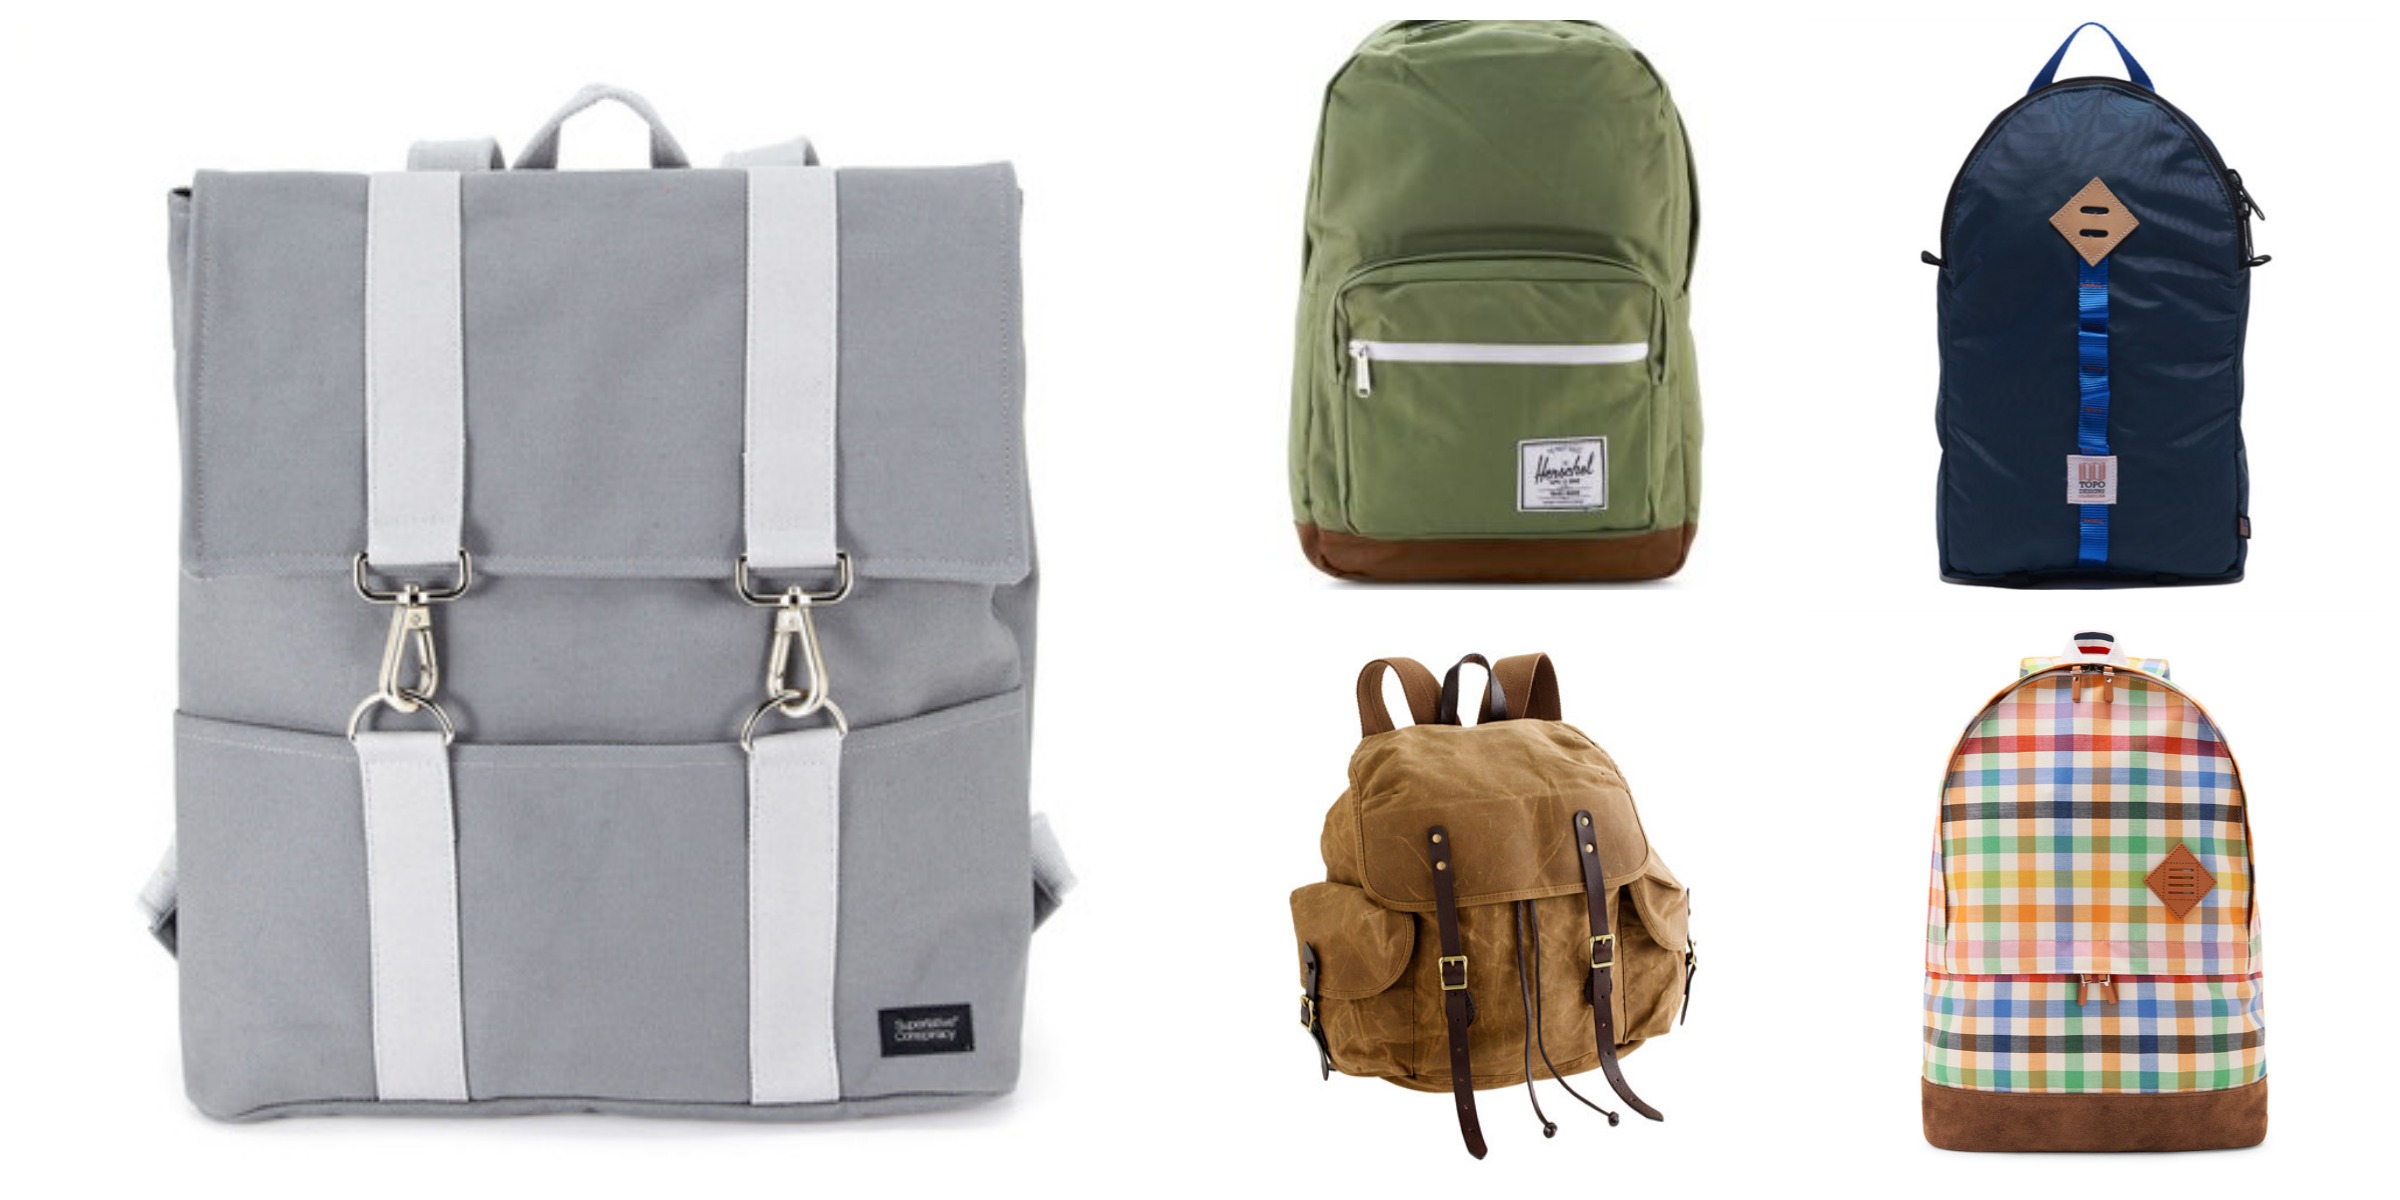 5 Stylish Backpacks for All Your Carrying Needs - The Manual